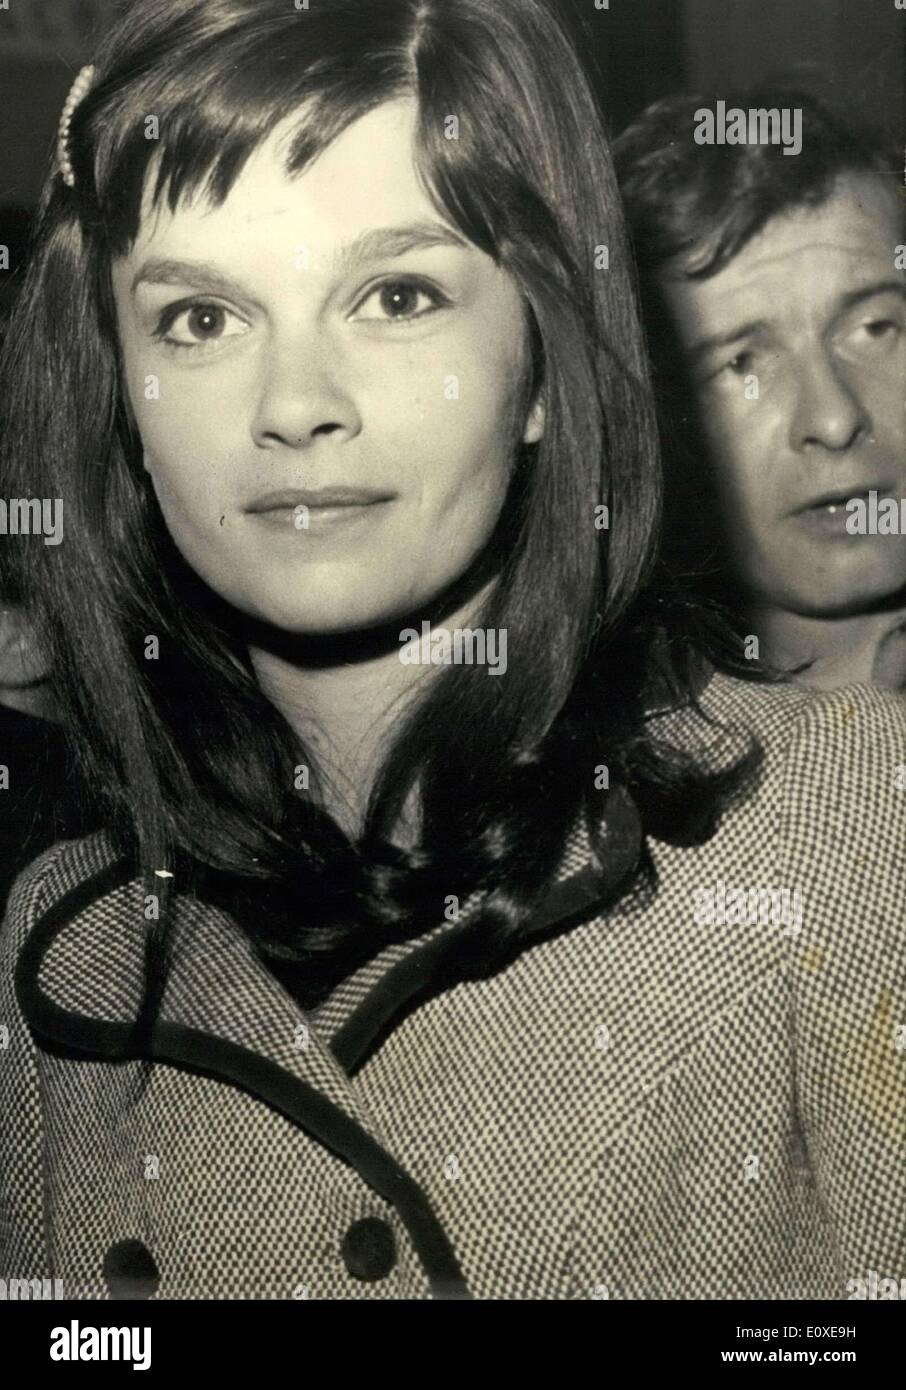 May 11, 1966 - CANNES FILM FESTIVAL: OPS:- THE COMING YOUNG ACTRESS GENEVIEVE BUJOLD, 22, STAR OF THE BANNED FILM ''LA GUERRE EST FINIE'' PICTURED AT CANNES YESTERDAY. (THE FILM ''LA GUERRE EST FINIE'' - THE WAR IS OVER- DEPICTING A HERO OF THE SPANISH CIVIL WAR WAS BANNED FOR POLITICAL REASONS) Stock Photo